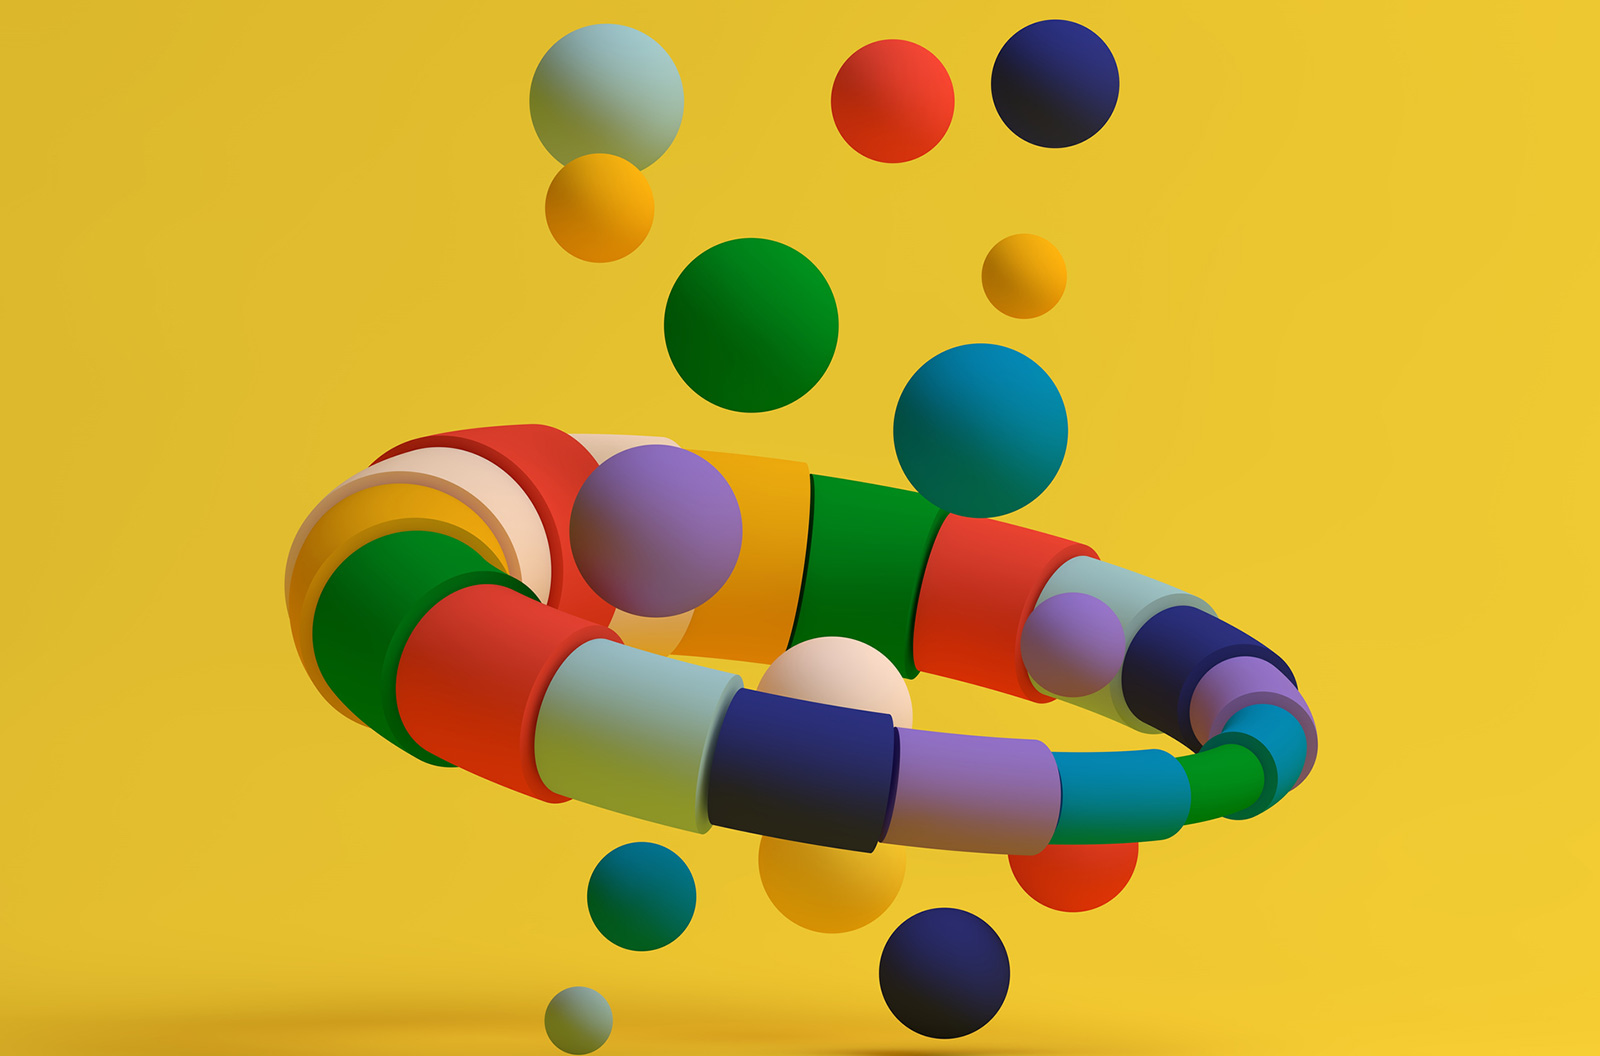 A stock image of a yellow background with colorful balls and a ring by Adaask